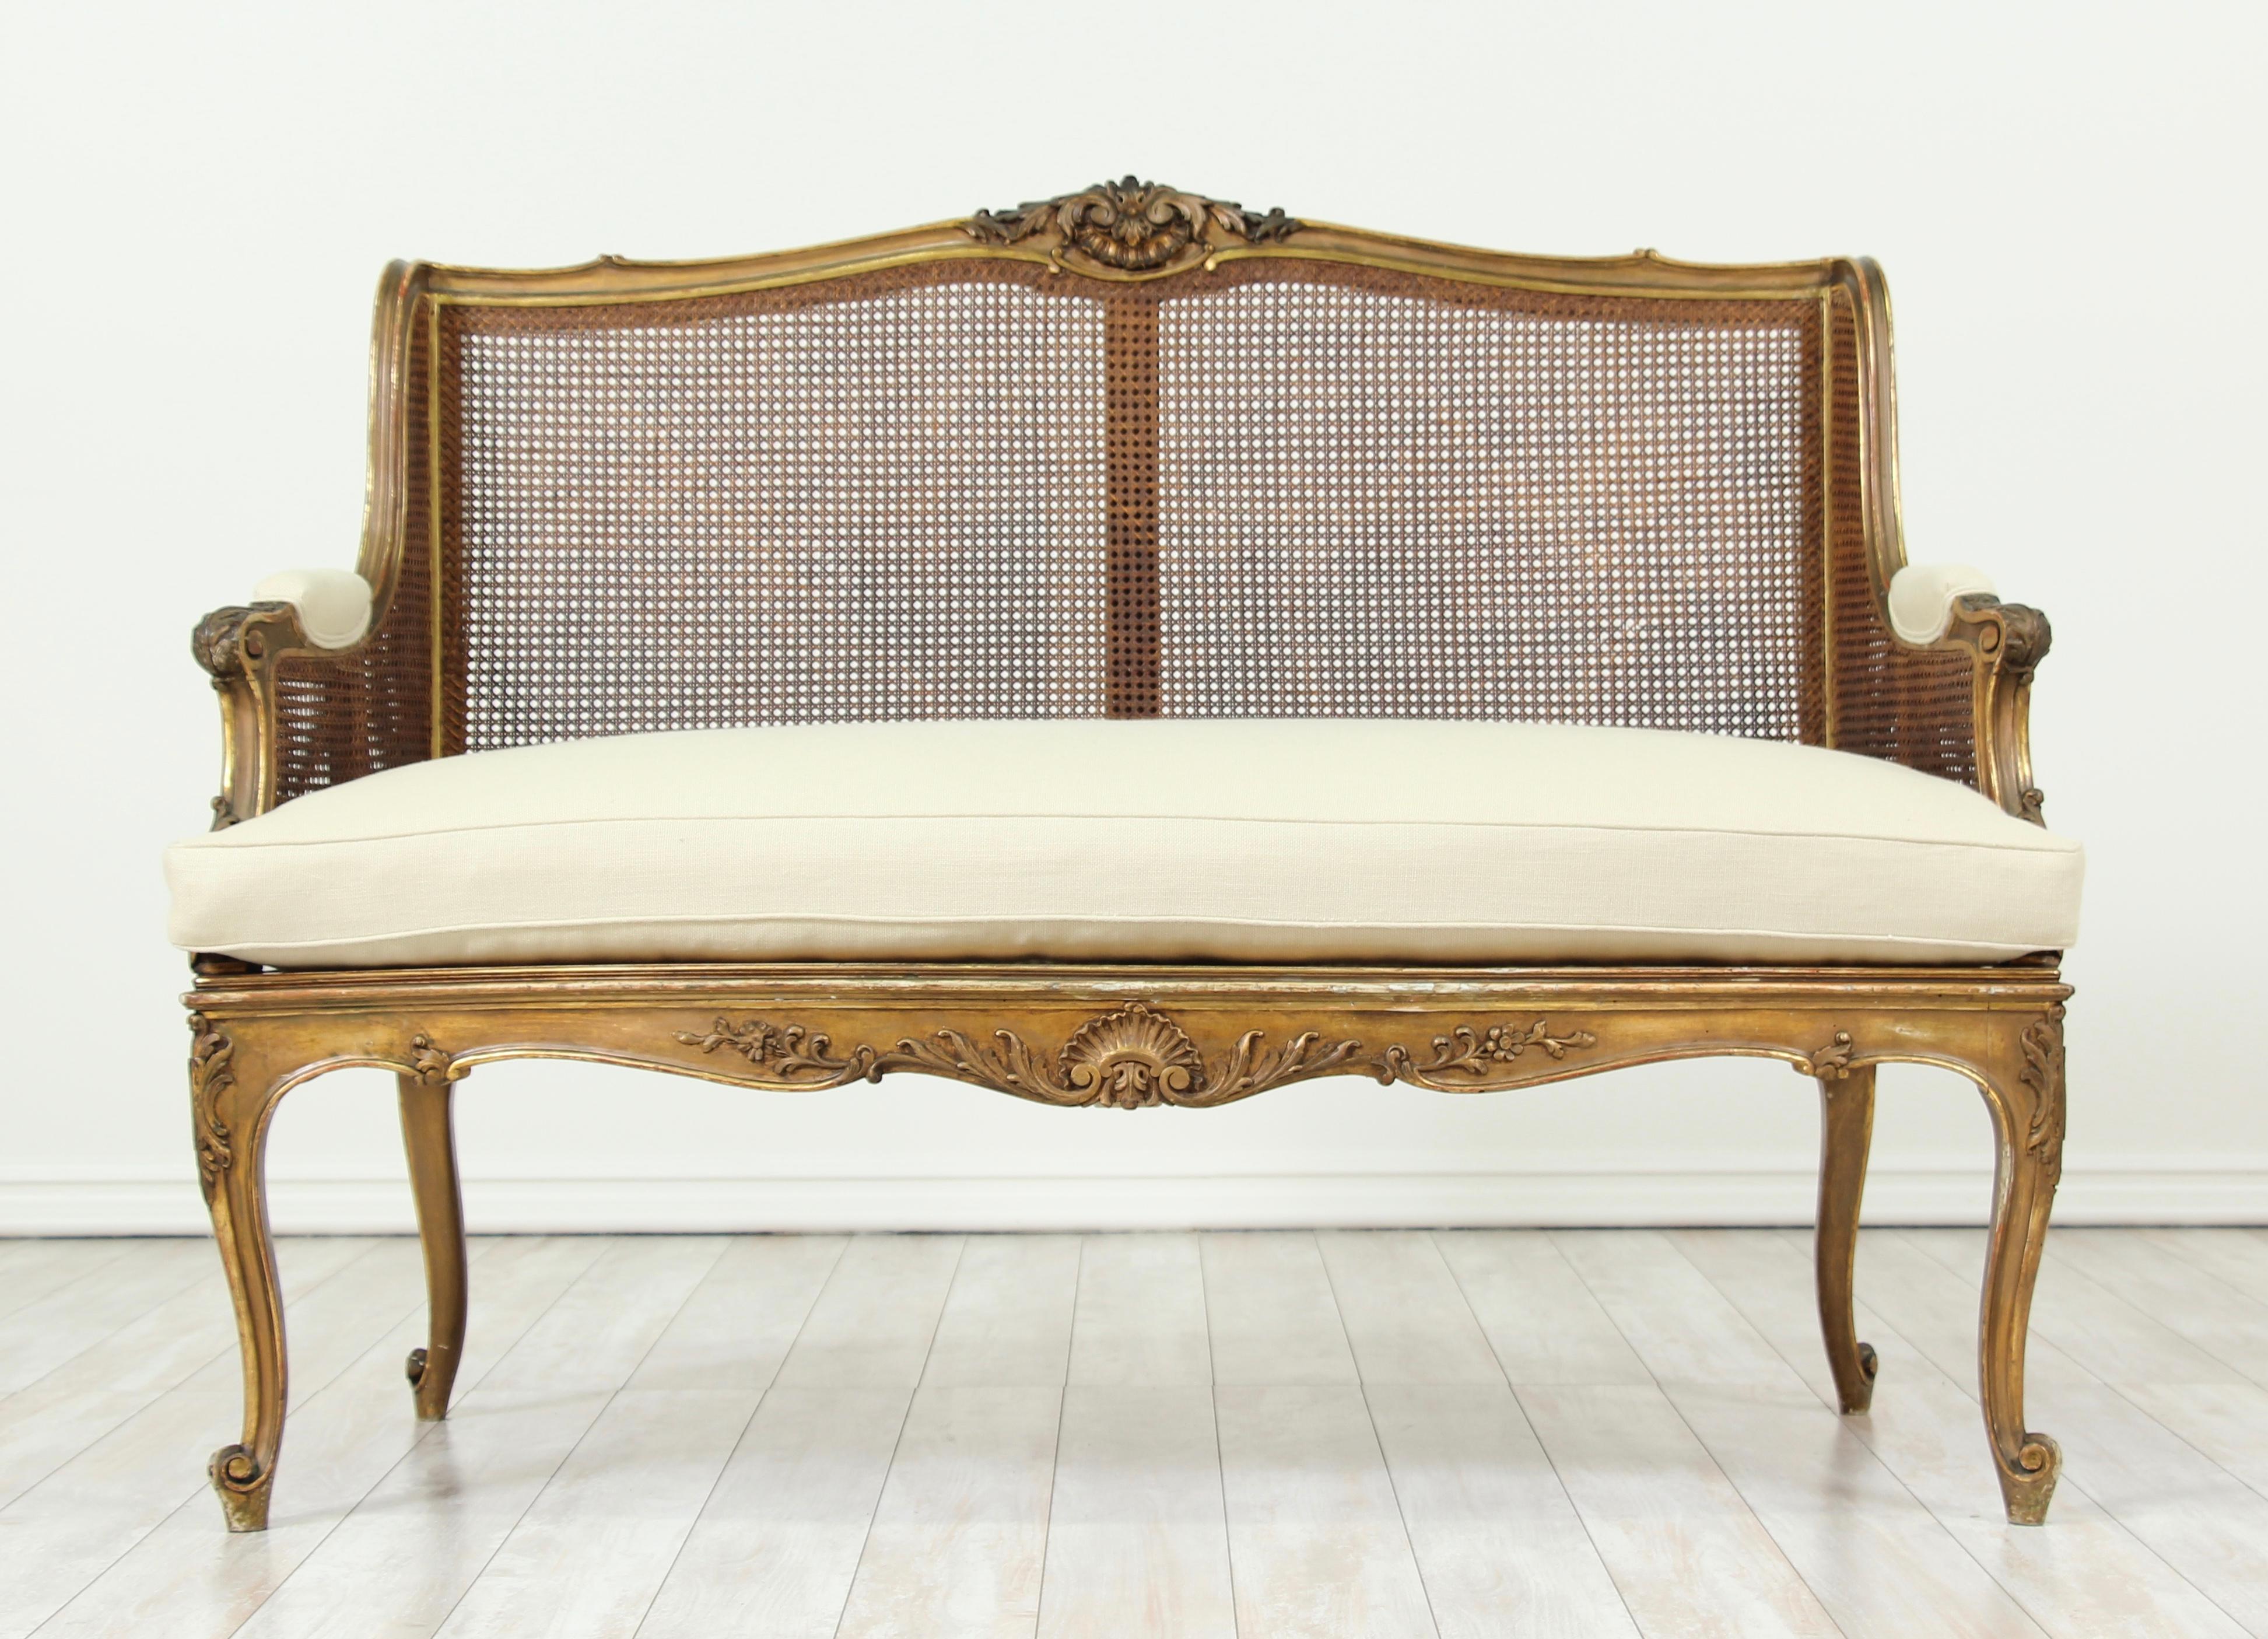      Beautiful, 1920s French Louis XV-style caned giltwood settee with delicately carved decorations and new Belgian linen upholstery (loose seat cushion). 
     The settee would add a wonderful sense of French airiness to any interior. 
    